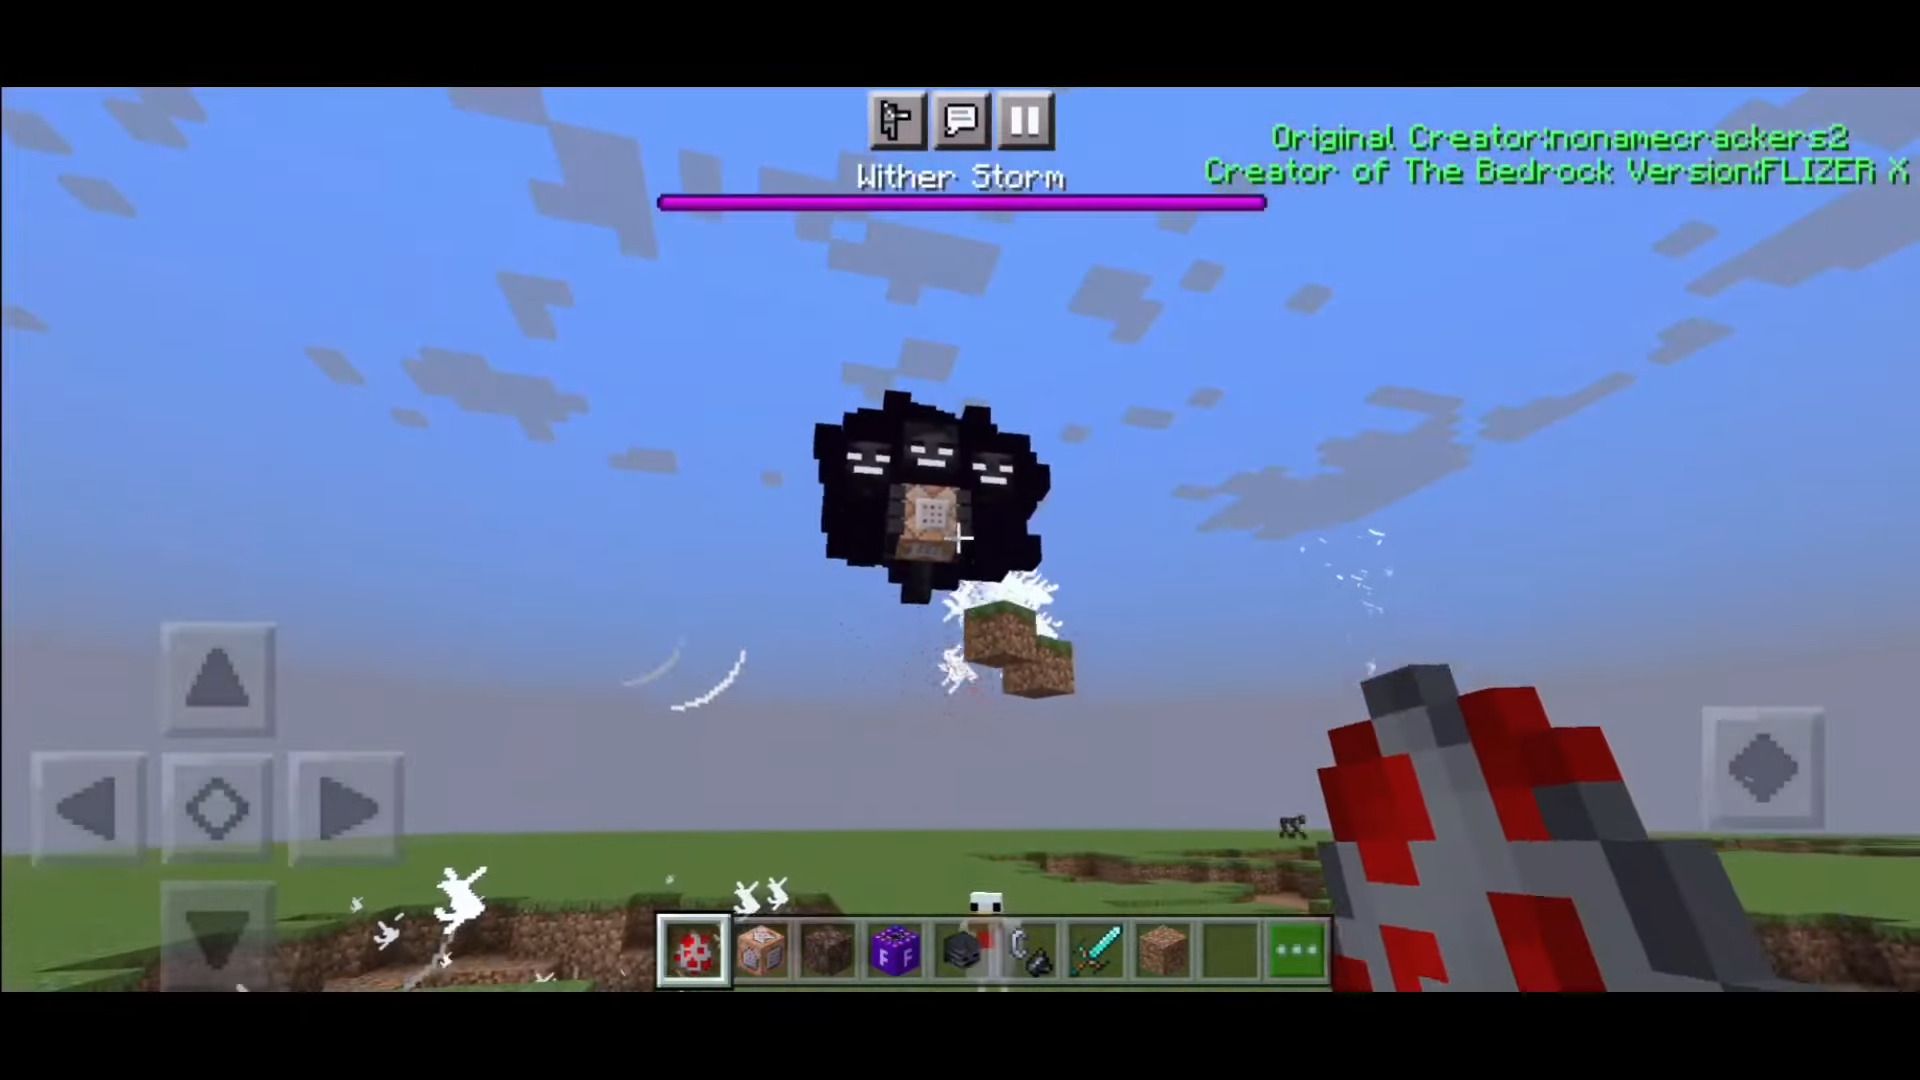 Wither Storm Mod APK for Android Download